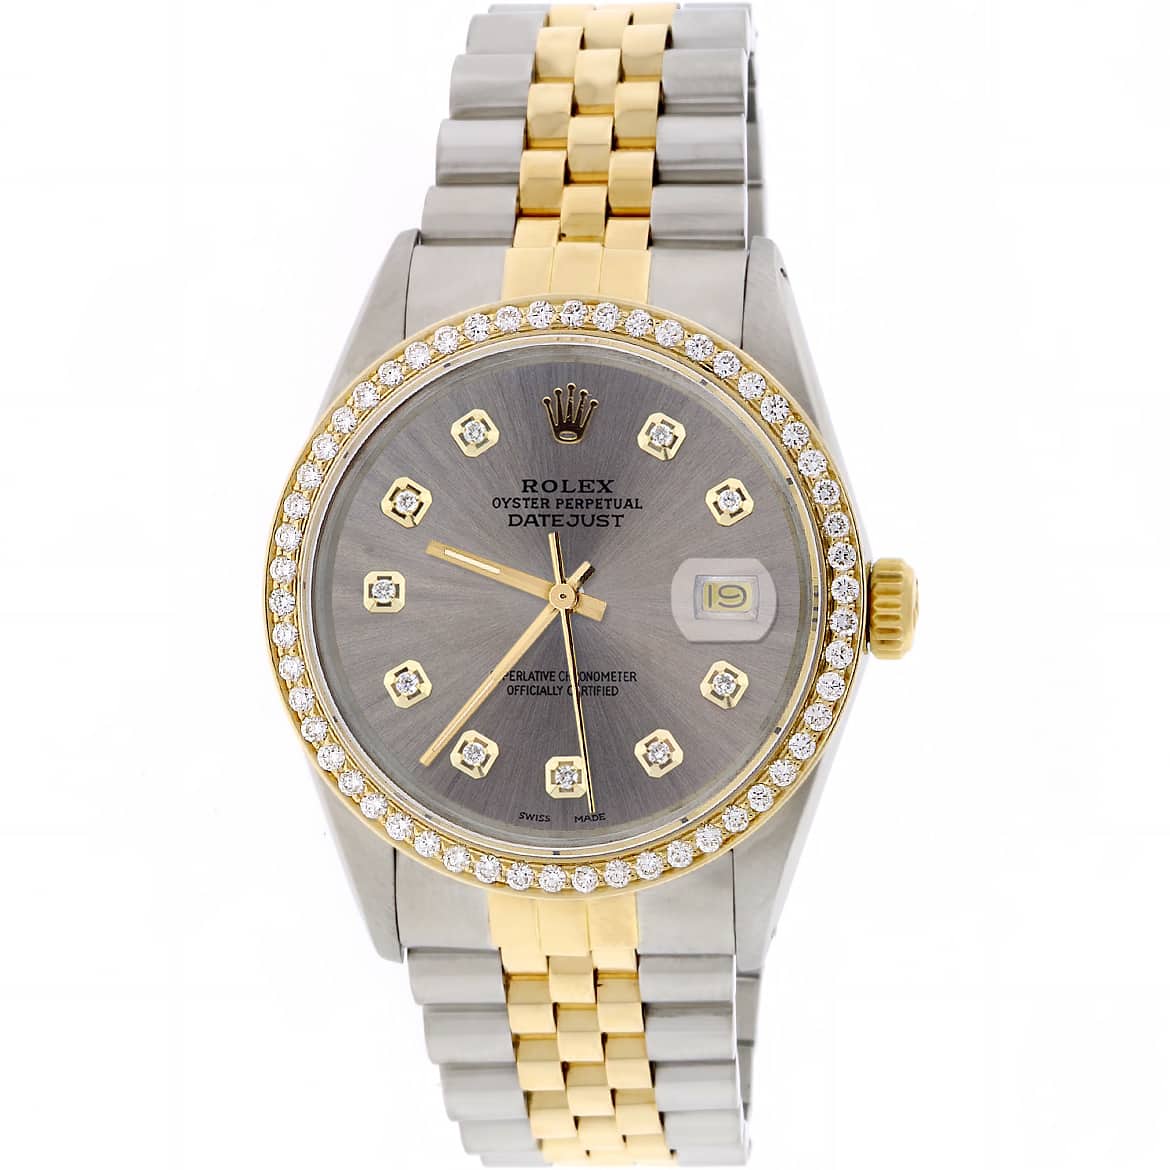 Rolex Datejust 2-Tone Gold/SS 36mm Automatic Watch with Rh